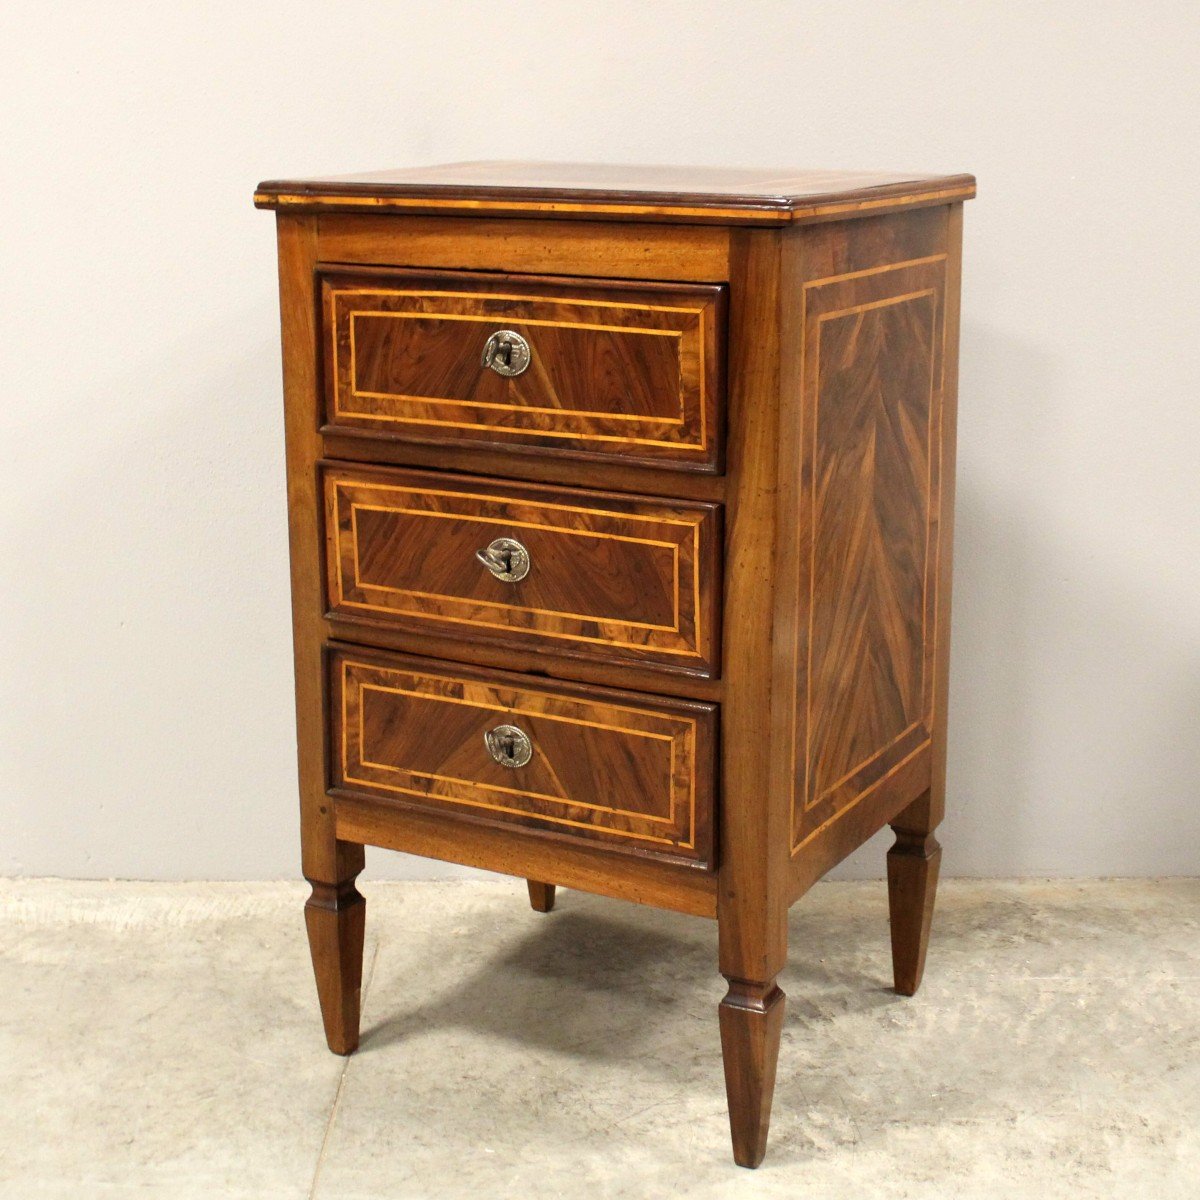 Antique Louis XVI Chest Of Drawers Cabinet In Walnut And Marquetry – Italy 18th